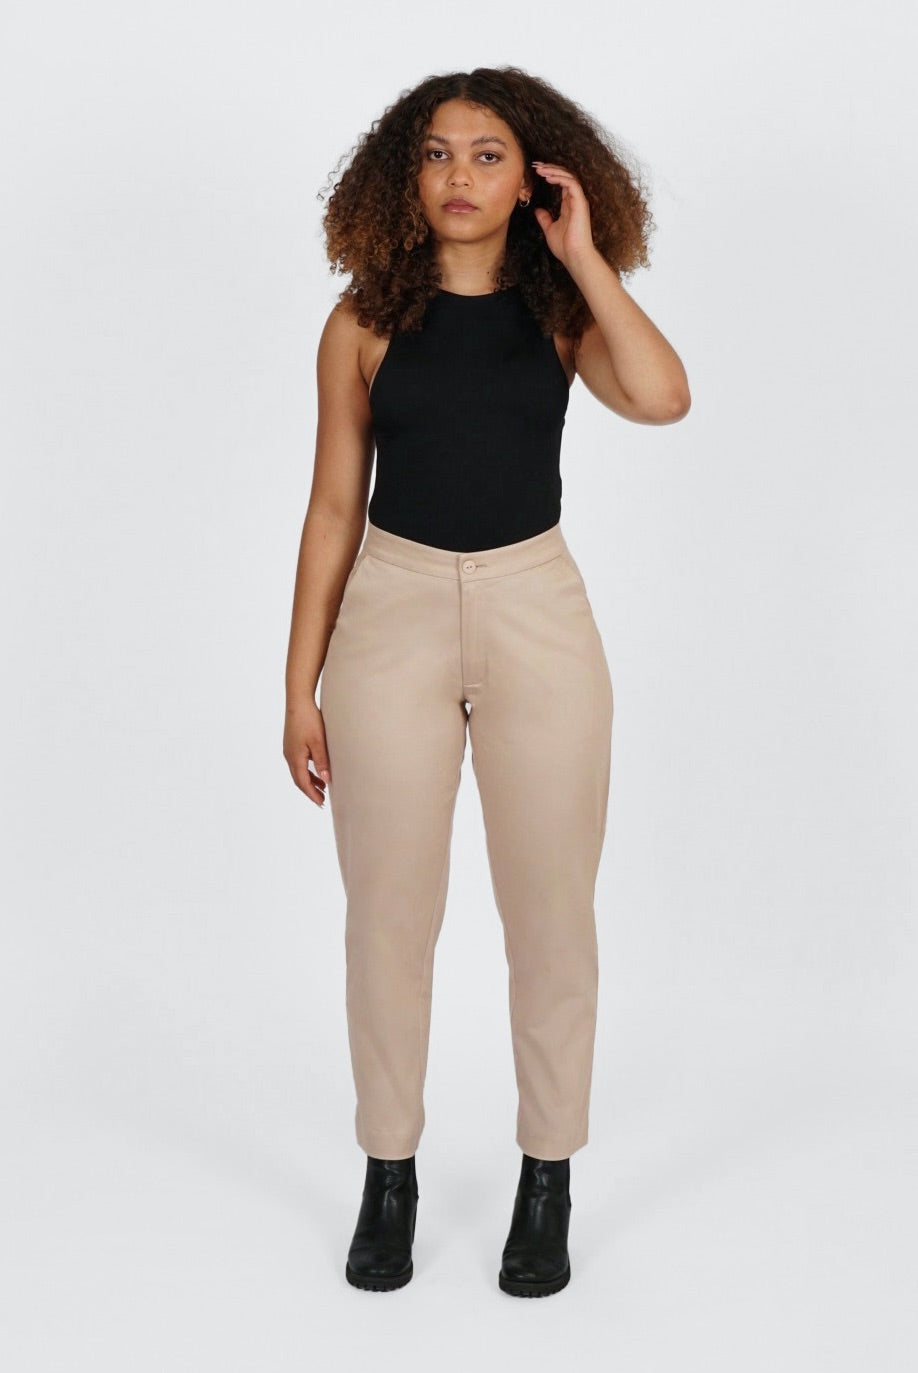 The Crop Pant by Aam is a relaxed, cotton trouser designed for women with full hips and thighs. It's made from a butter-soft, 98% organic cotton with 2% stretch. Big pockets allow you to comfortably slide your hands or phone, and a small back elastic provides comfort at the waist. The Crop Pant comes in two colors - beige and black.